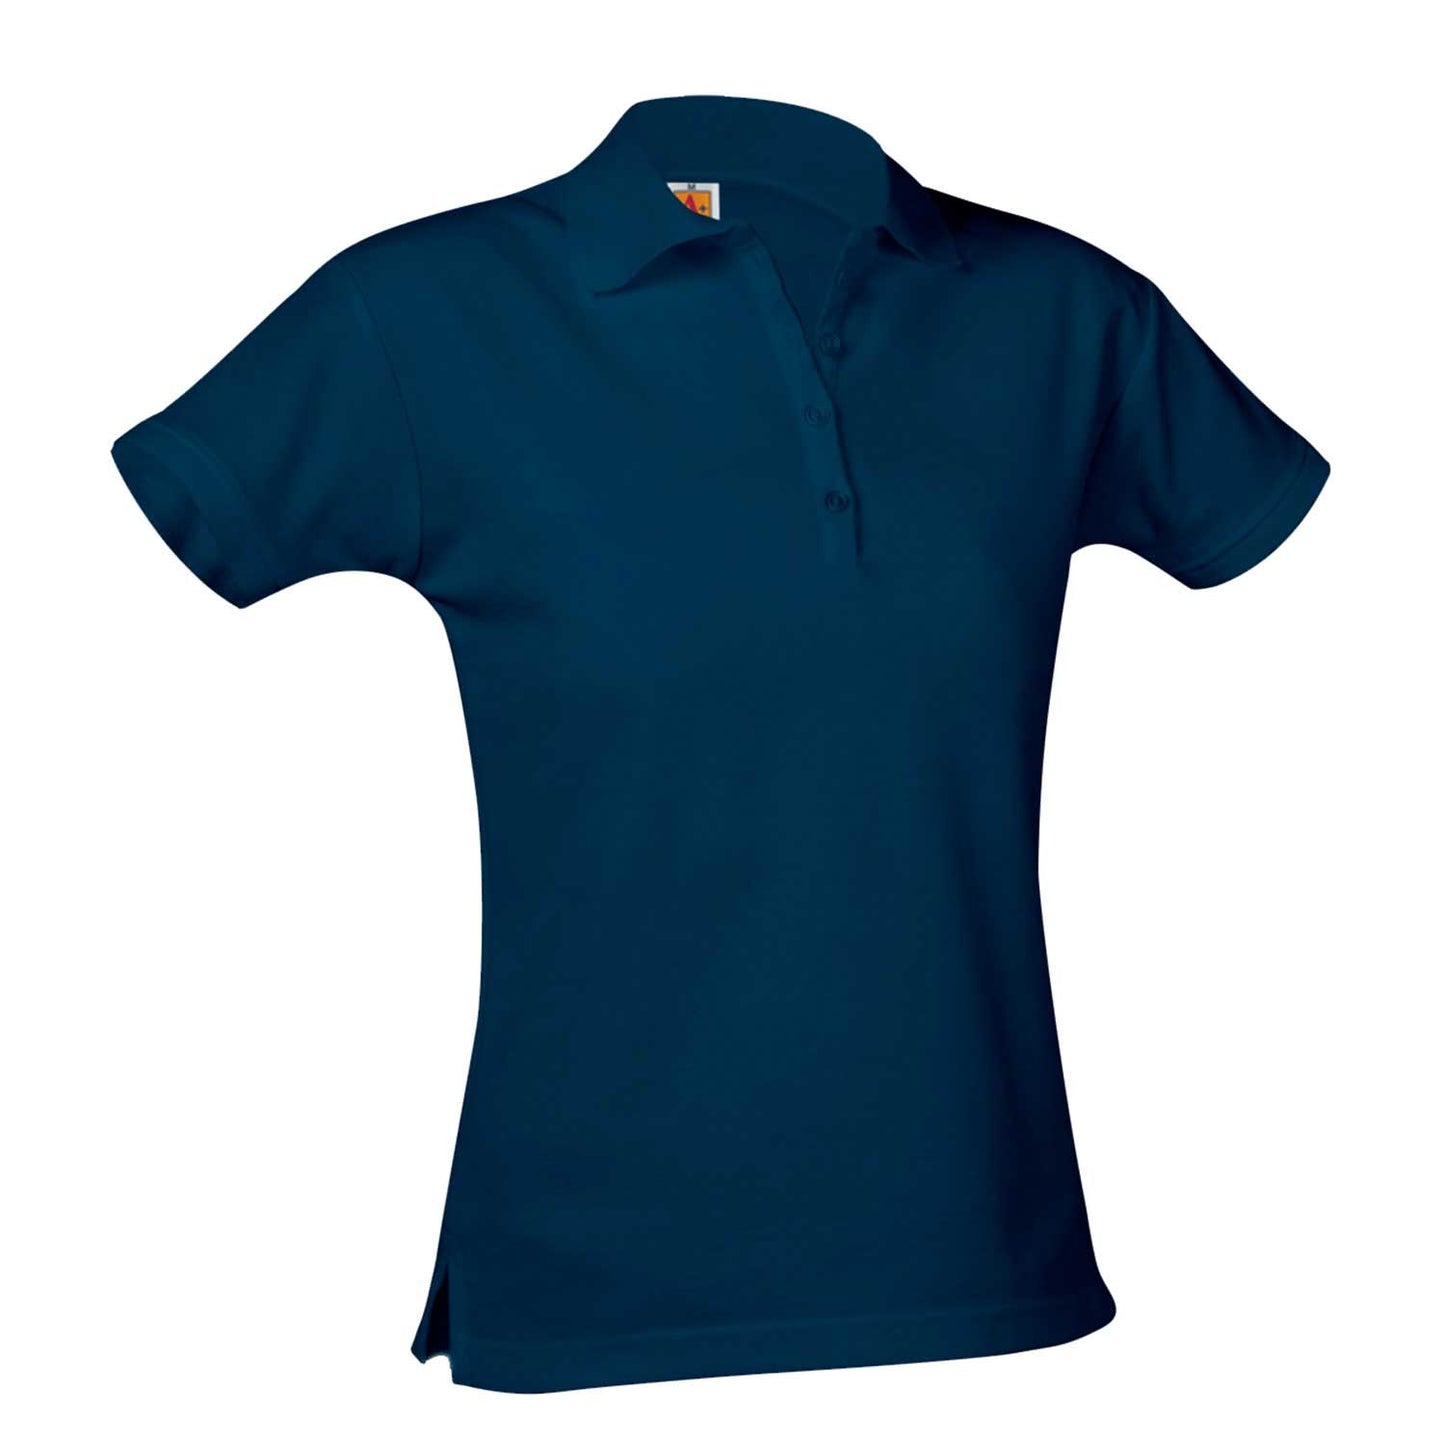 Girls Short Sleeve Fitted Knit Polo Shirt-Navy